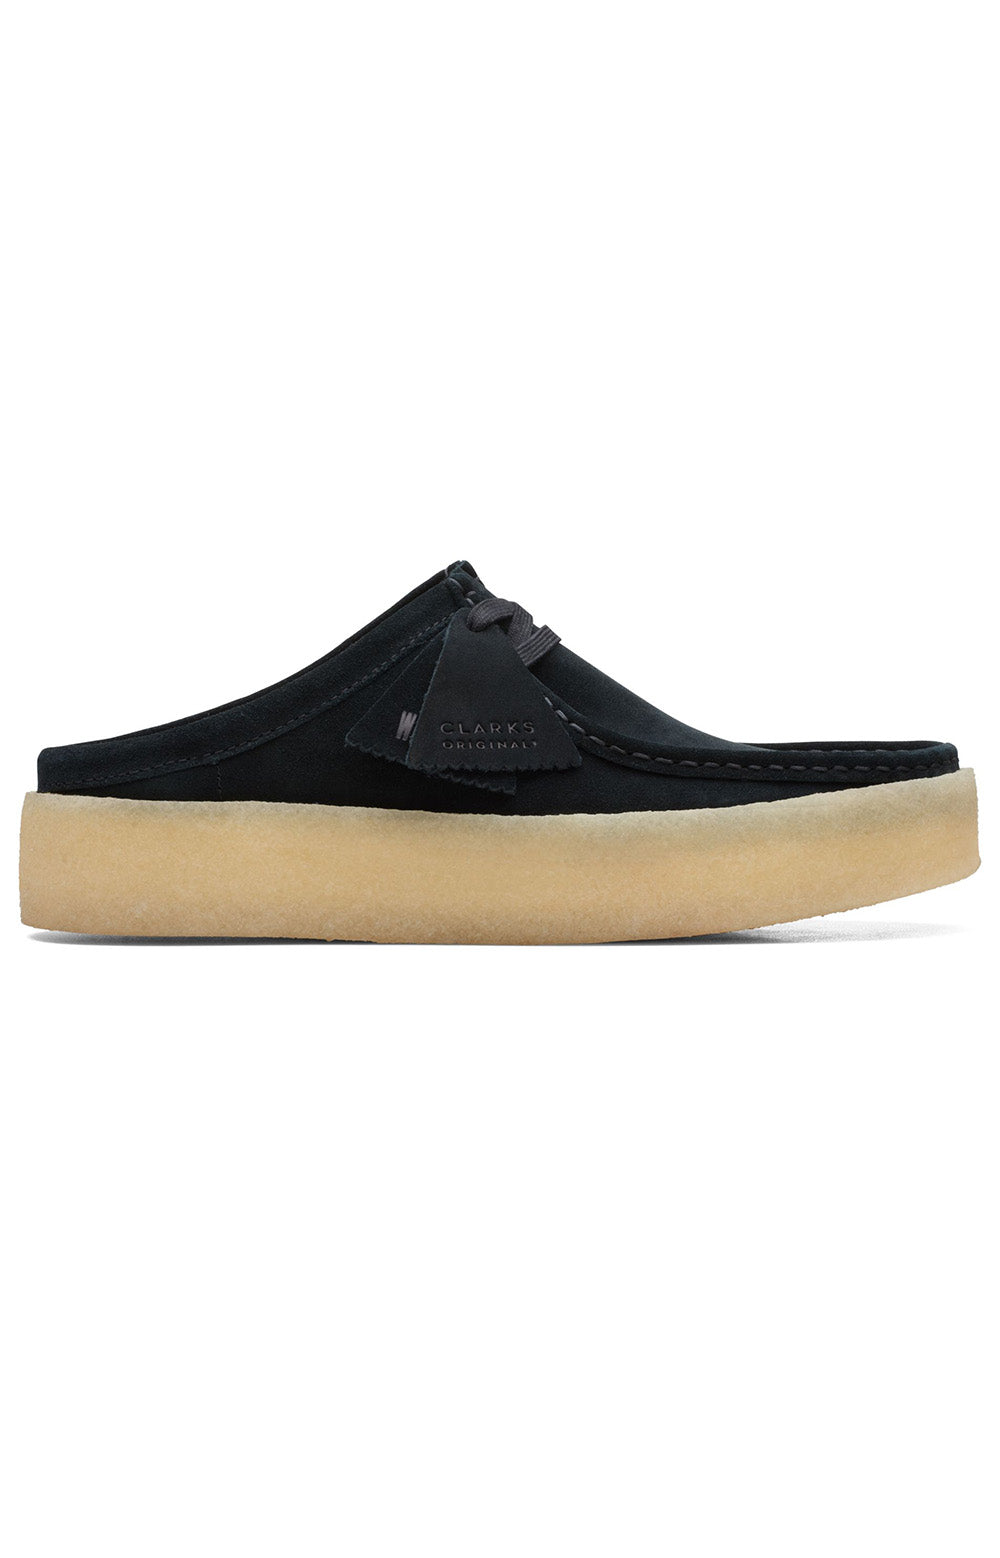 Clarks Originals Wallabee Cup Low Men's Black Suede 26167285 shoes on display in a modern urban setting